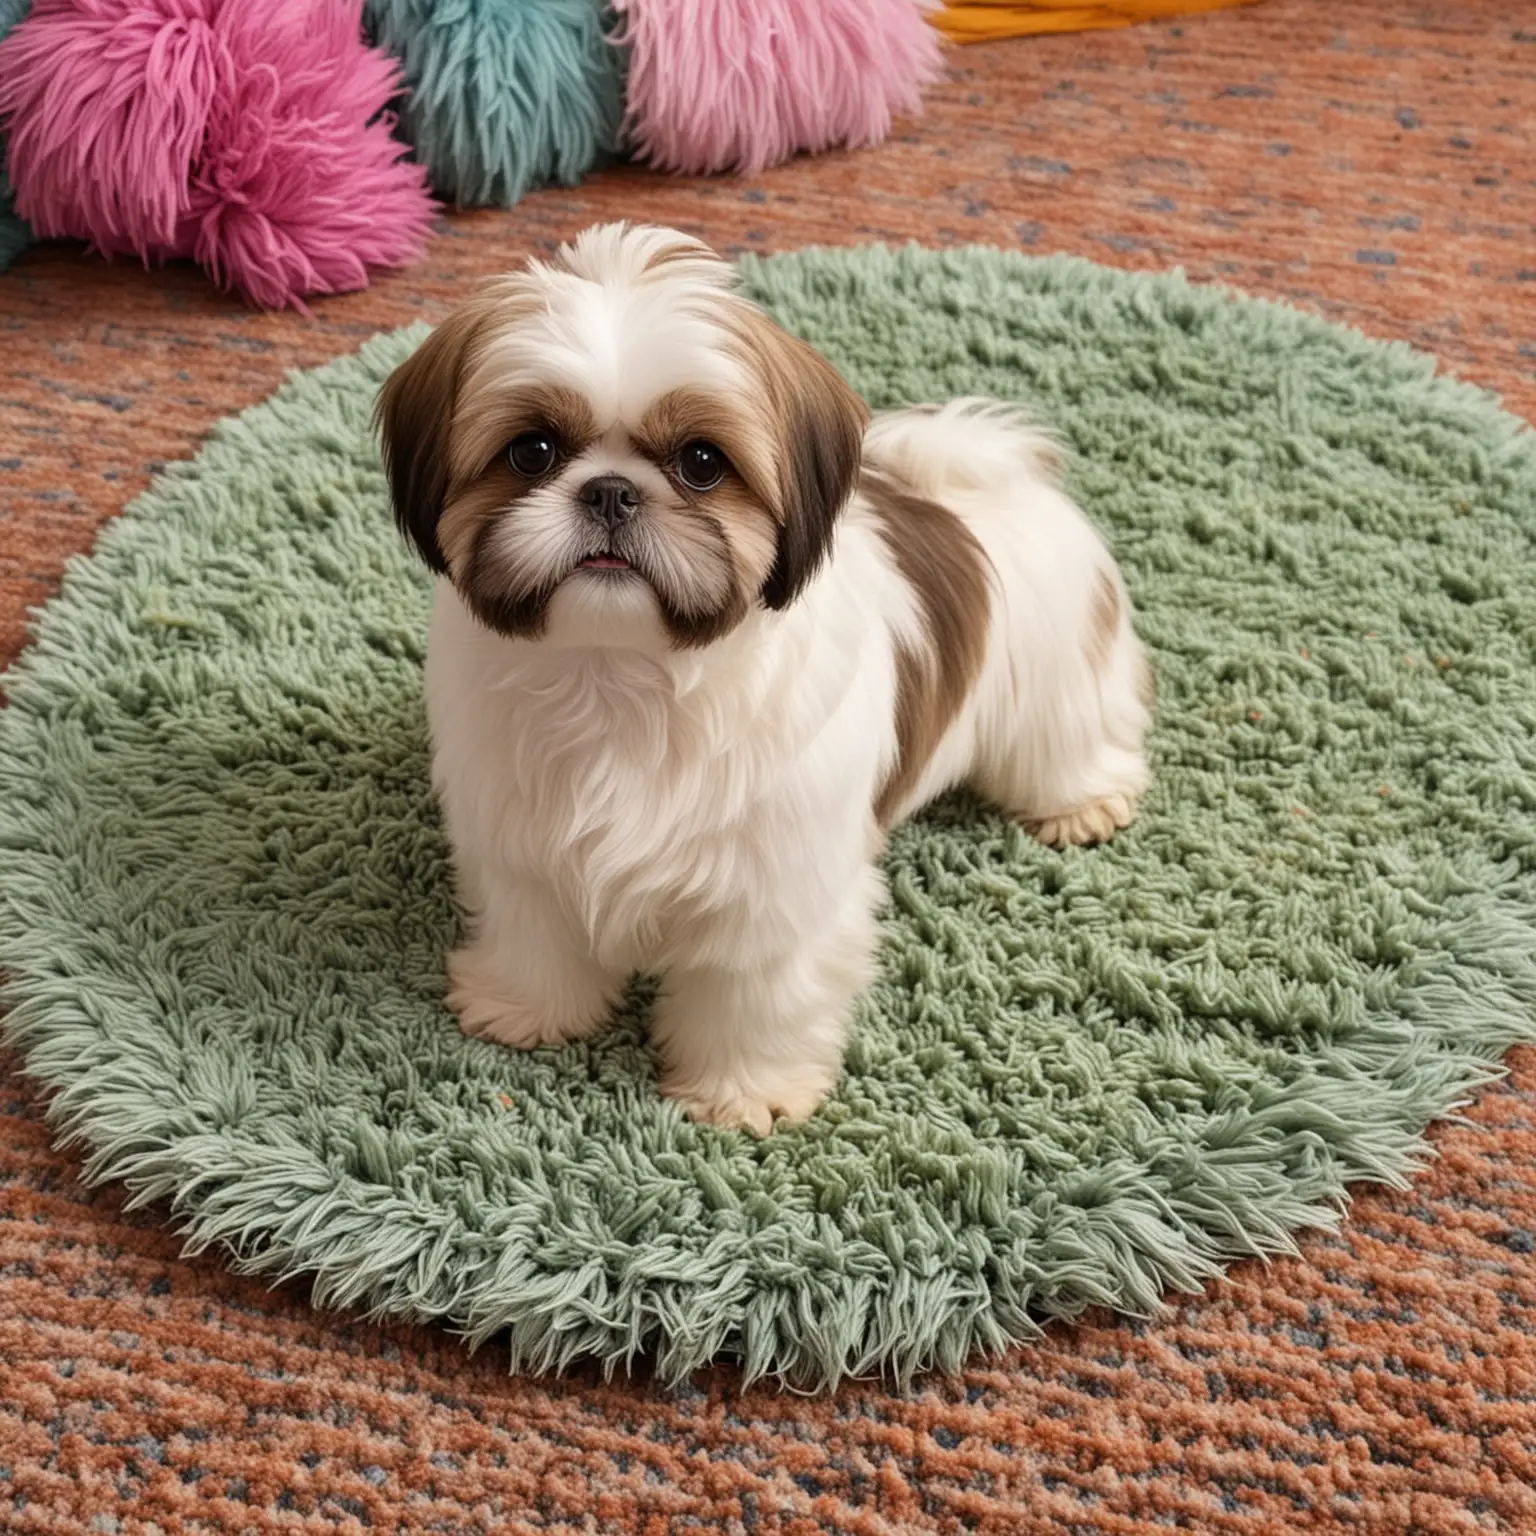 image if a cute shih tzu, make it resemble the dog in the picture as much as possible, make it semi-realistic with a colorful background  and on a shag rug like in the picture